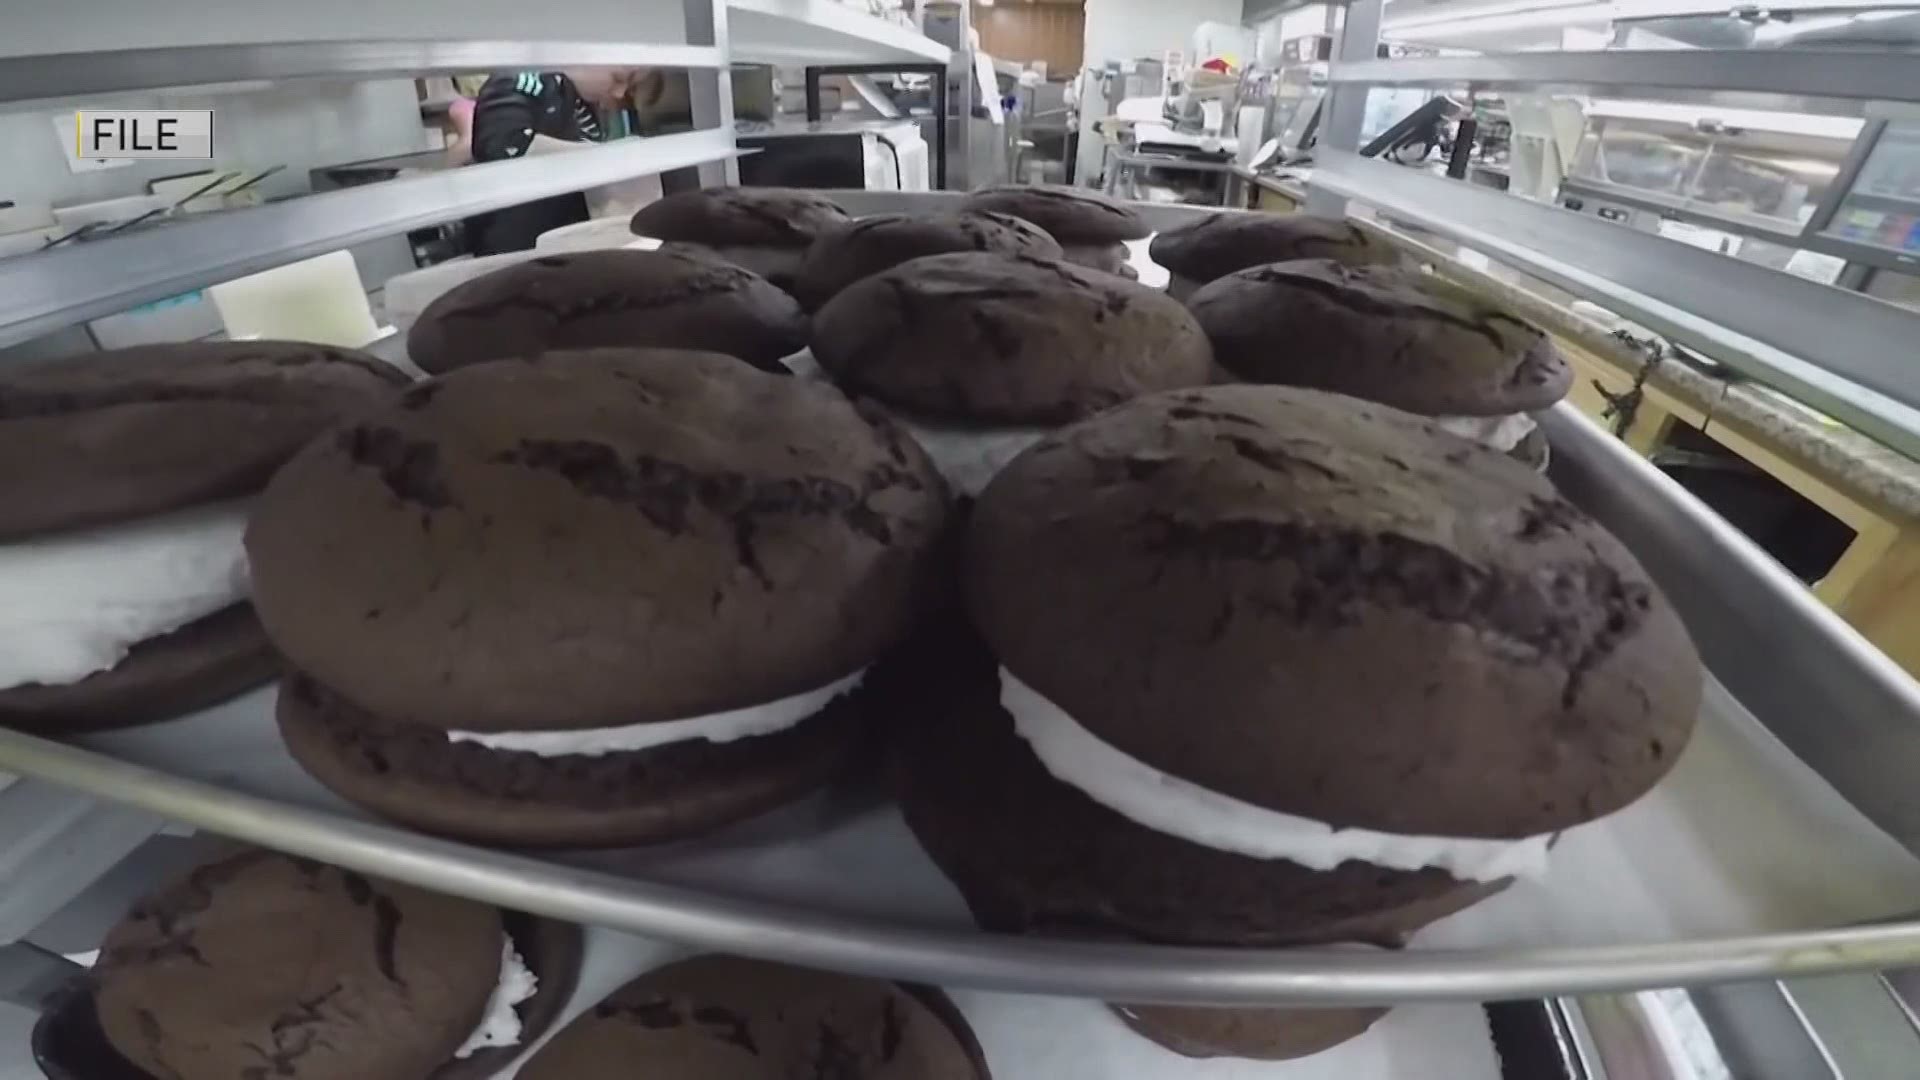 Following a two-year hiatus due to the pandemic, the festival is making a return to celebrate the beloved Maine state treat: whoopie pies!